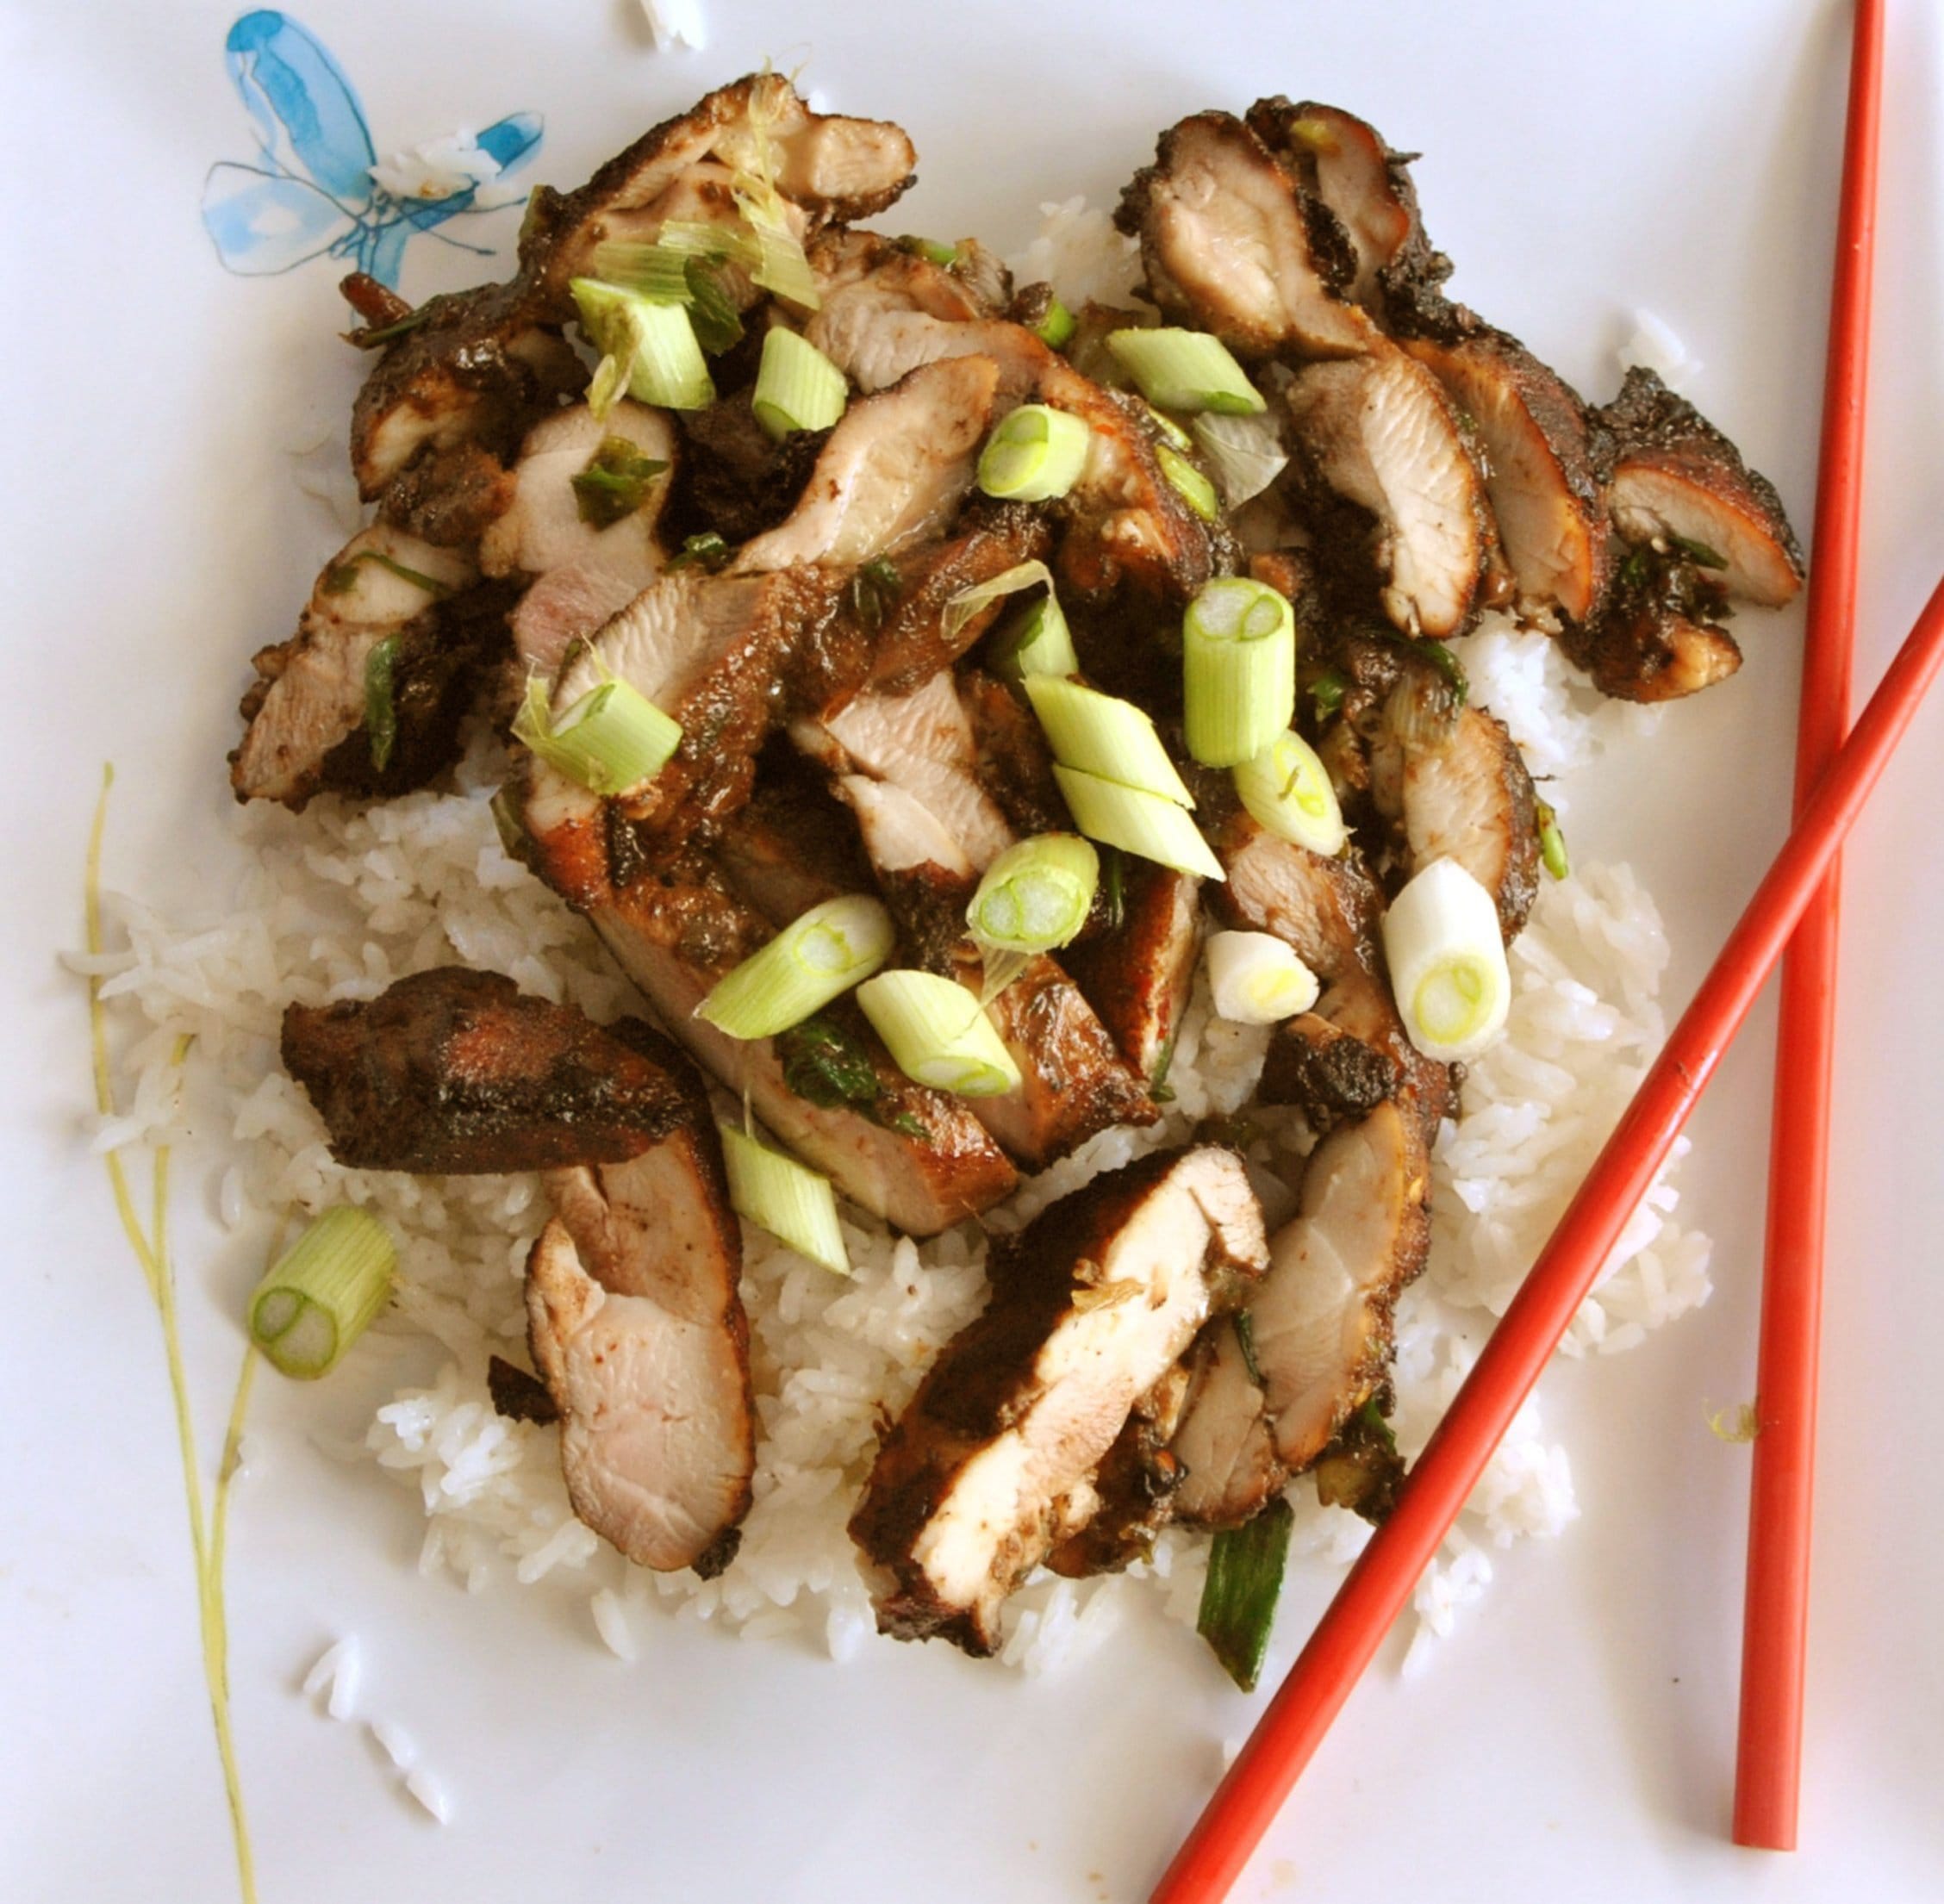 Fragrant crispy chicken combines succulent dark meat with an extremely tasty marinade.